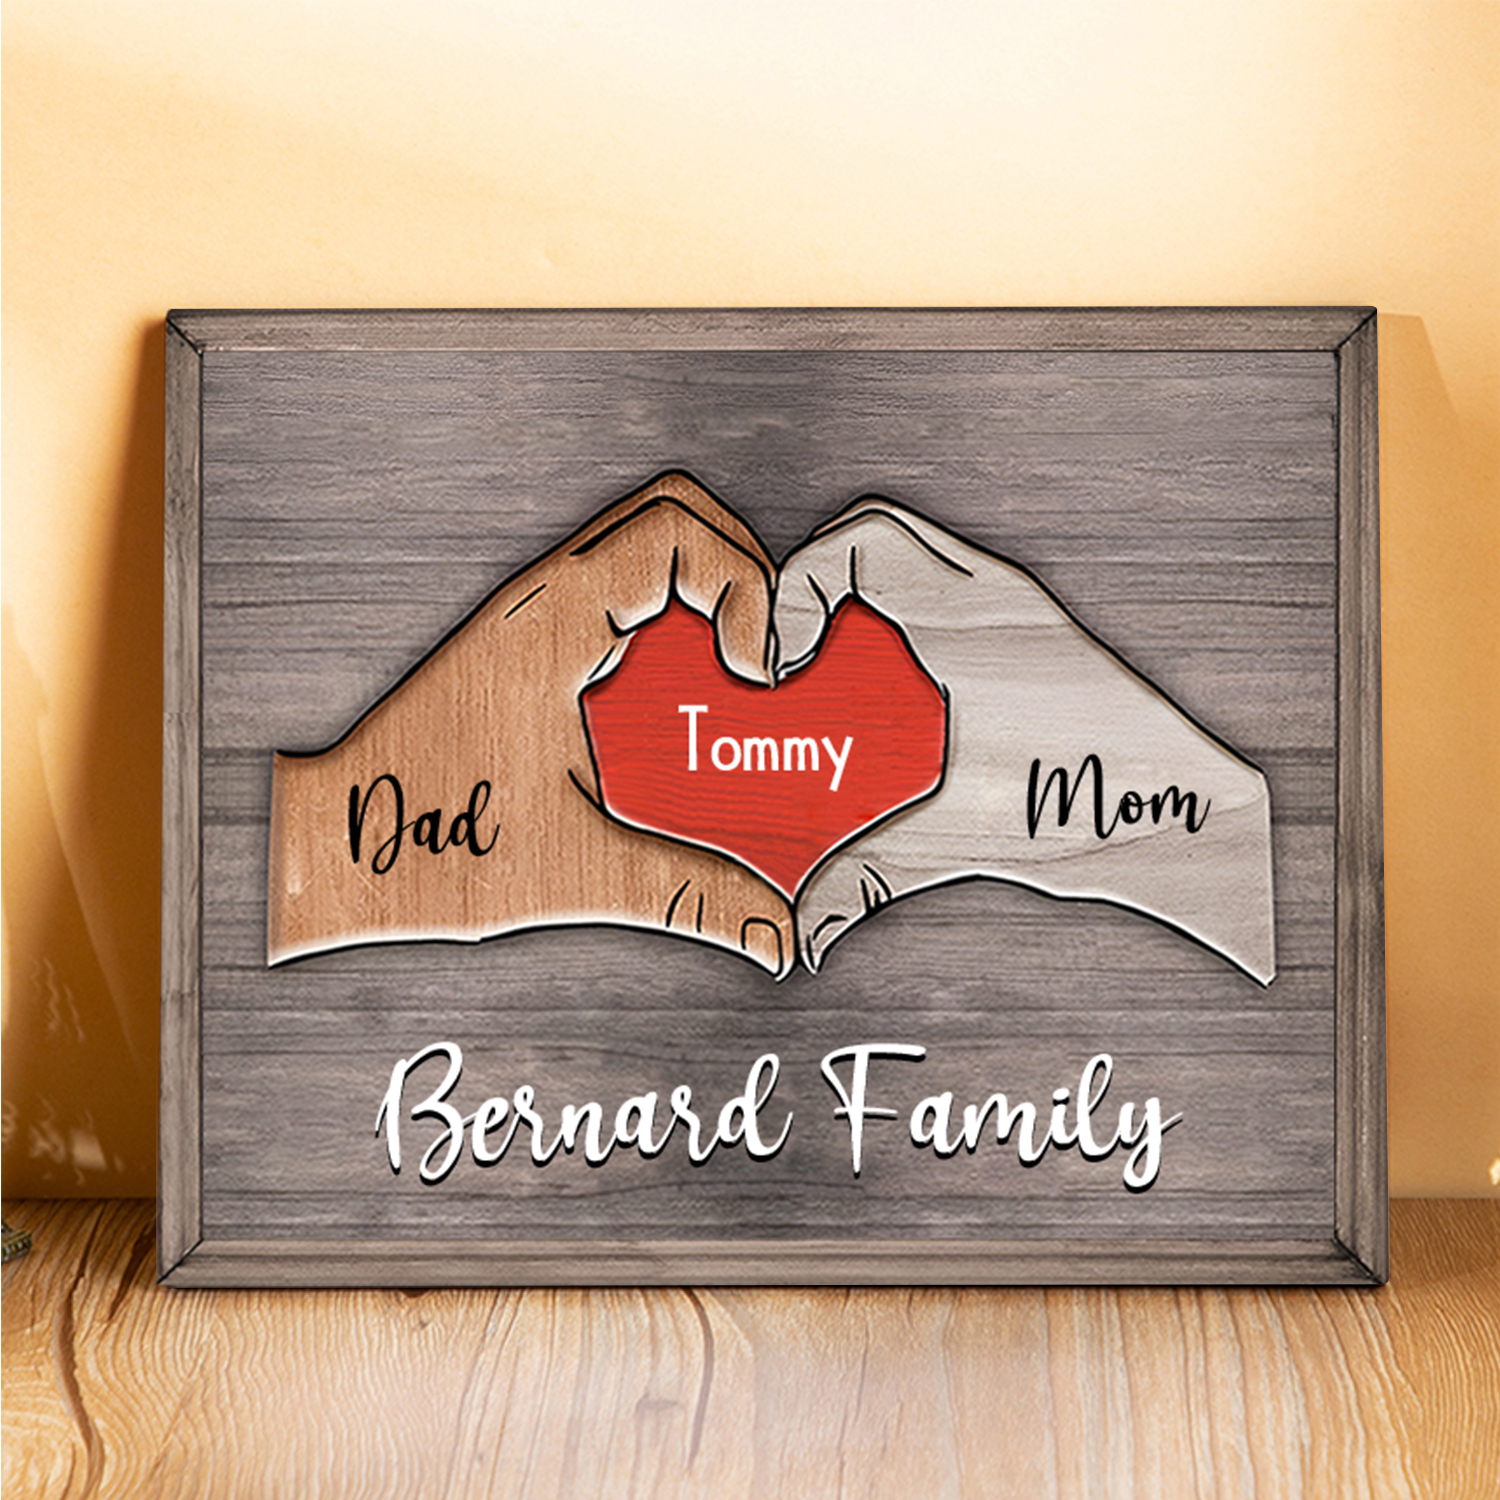 Jessemade UK 1 Name - Personalized Love Heart Customized Name and Text Wooden Ornament Father's Day Gift for Dad 20.99 t1-n1